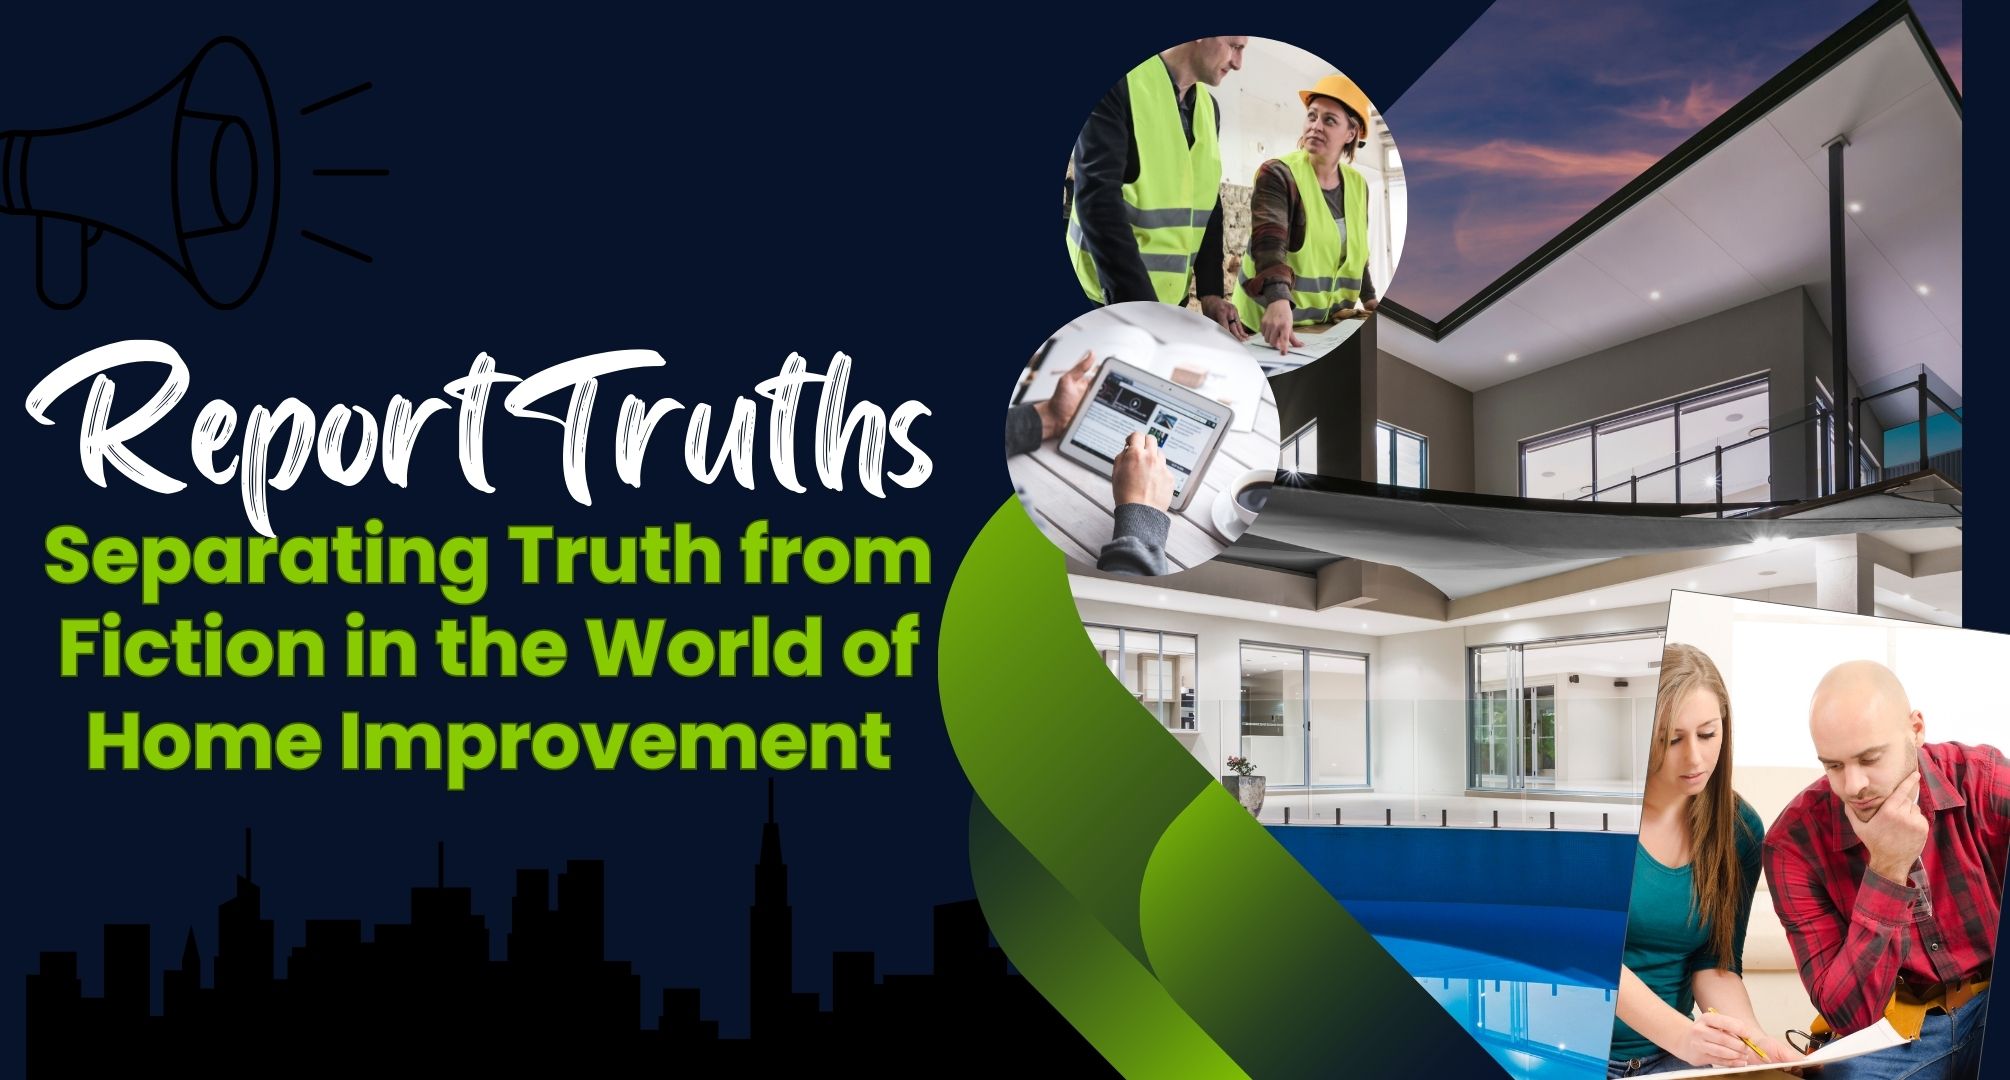  ReportTruths: Separating Truth from Fiction in the World of Home Improvement